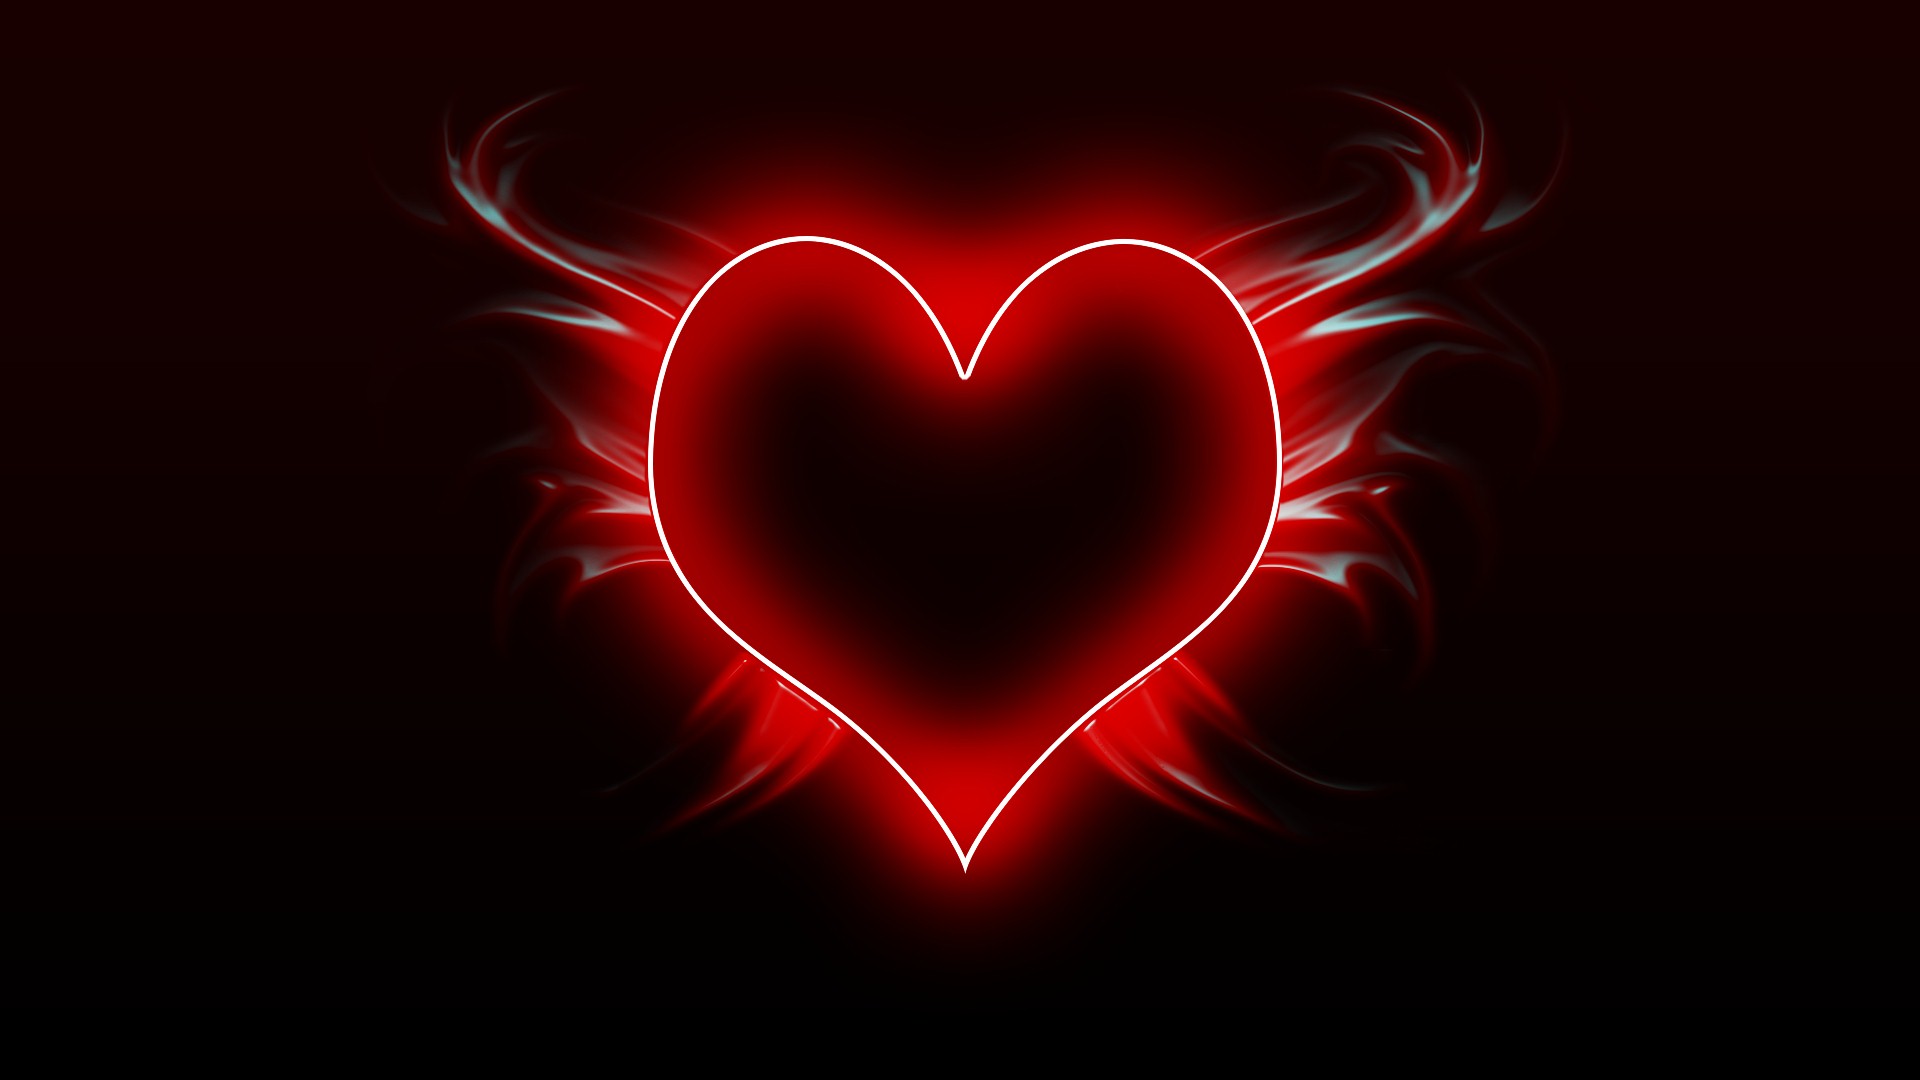 Red Glowing Heart Background Wallpaper.